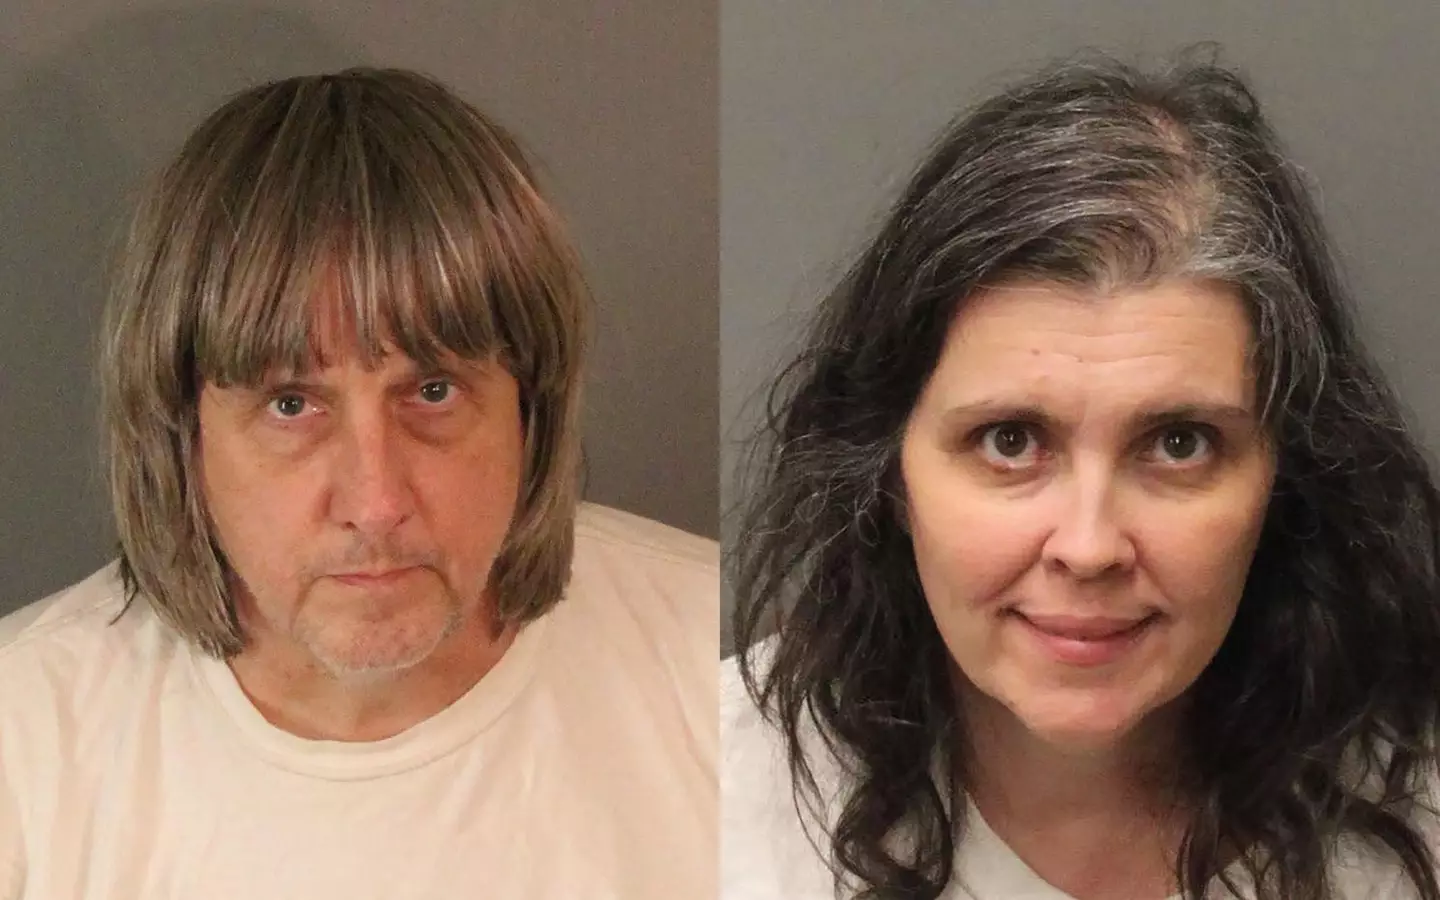 The Turpin siblings were subject to years of abuse by their parents, David and Louise.